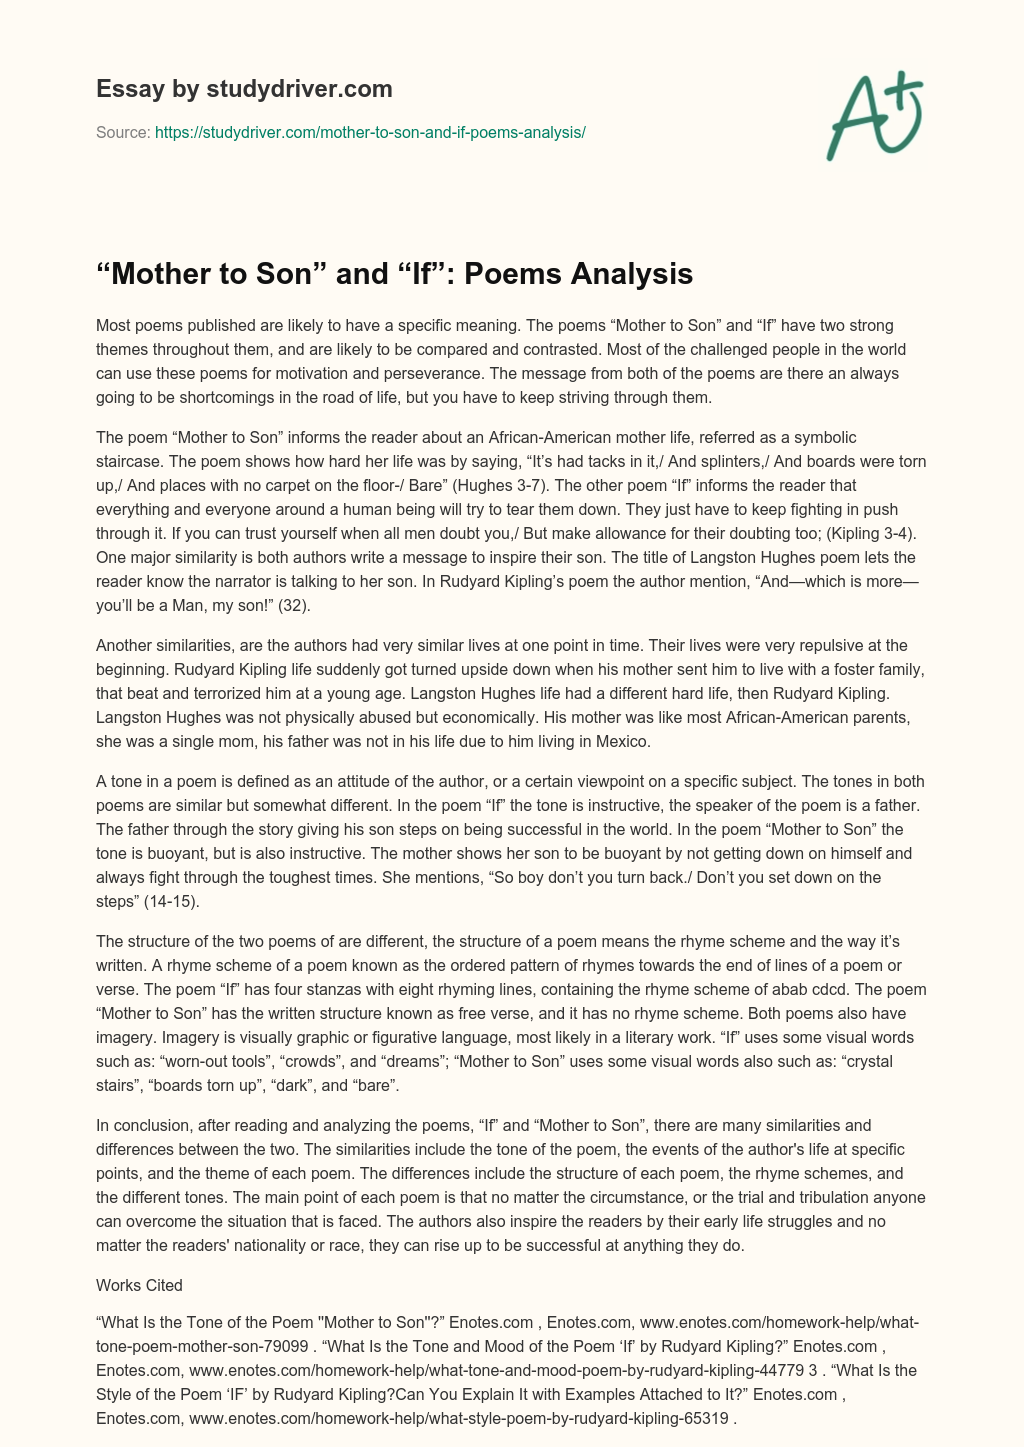 “Mother to Son” and “If”: Poems Analysis essay